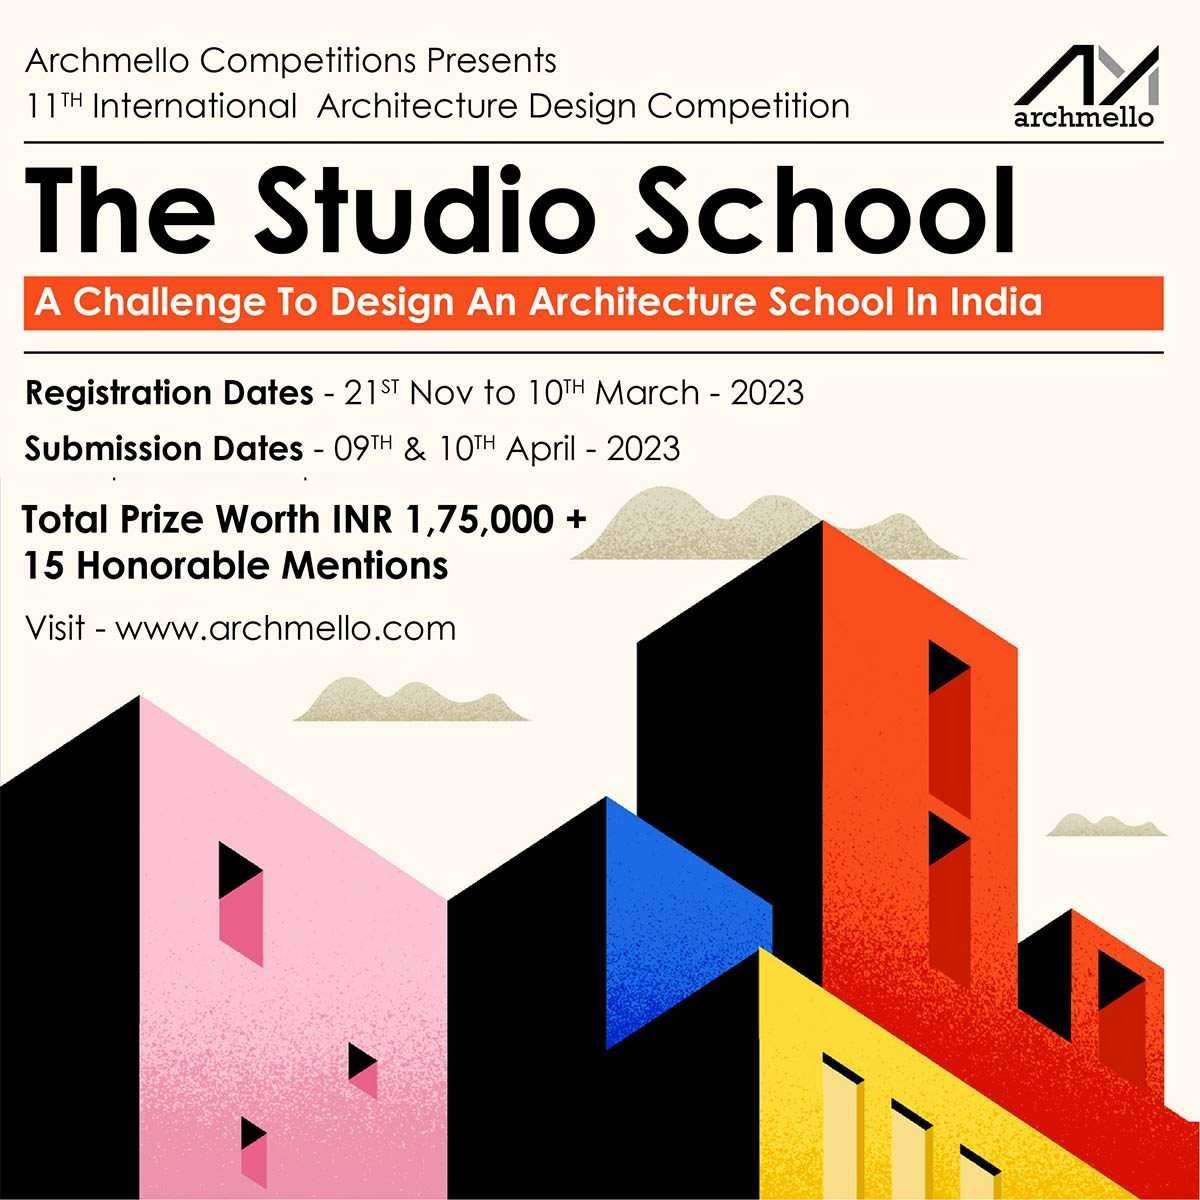 A Challenge To Design An Architecture School In India